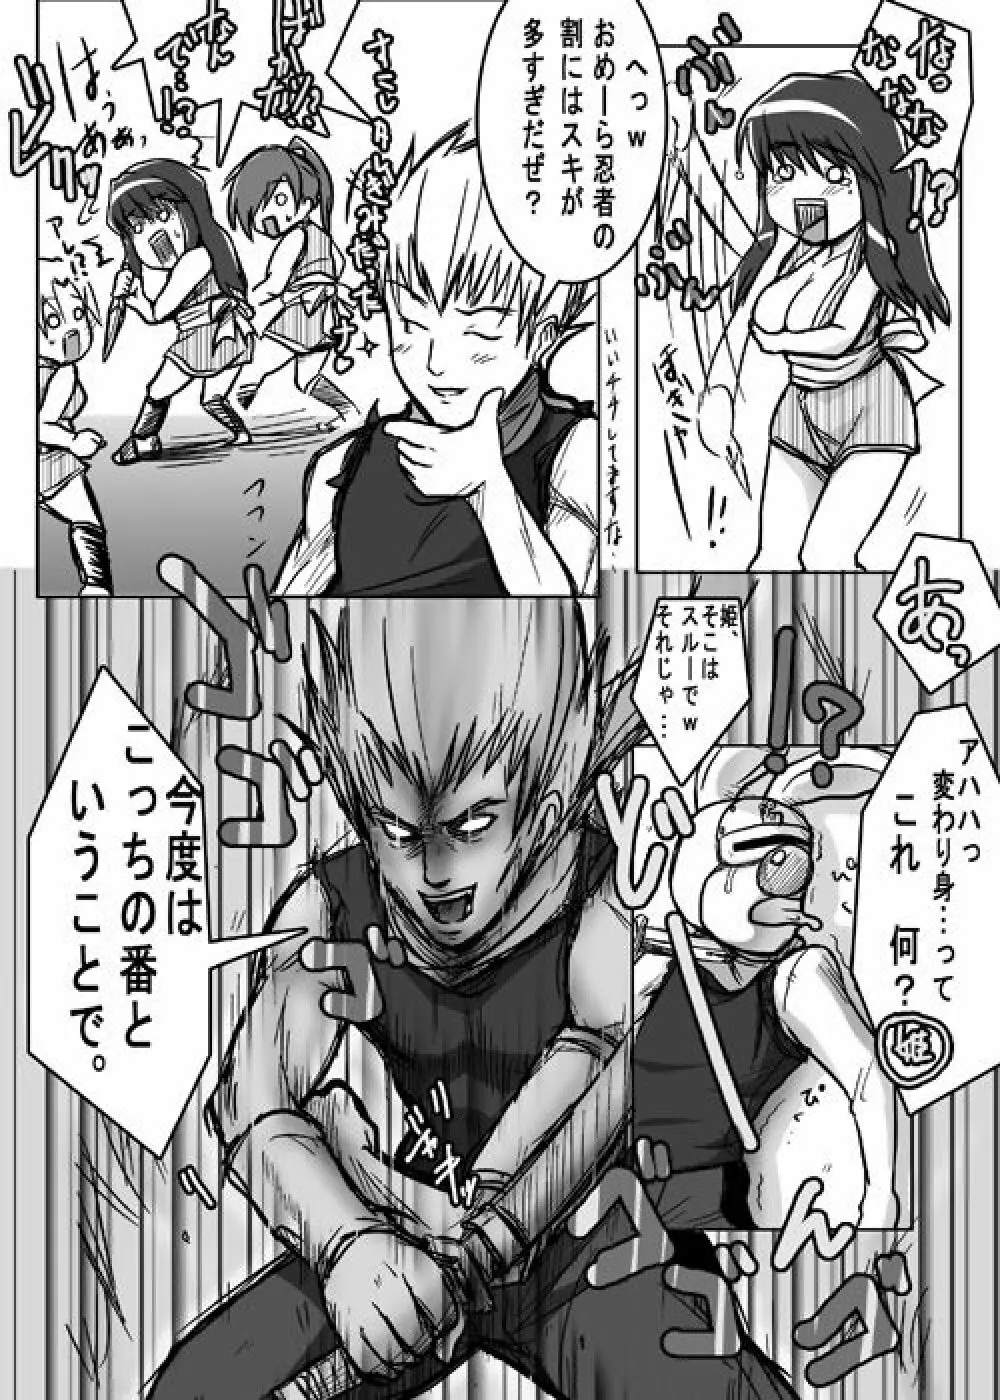 Same-themed manga about kid fighting female ninjas from japanese imageboard. Page.52